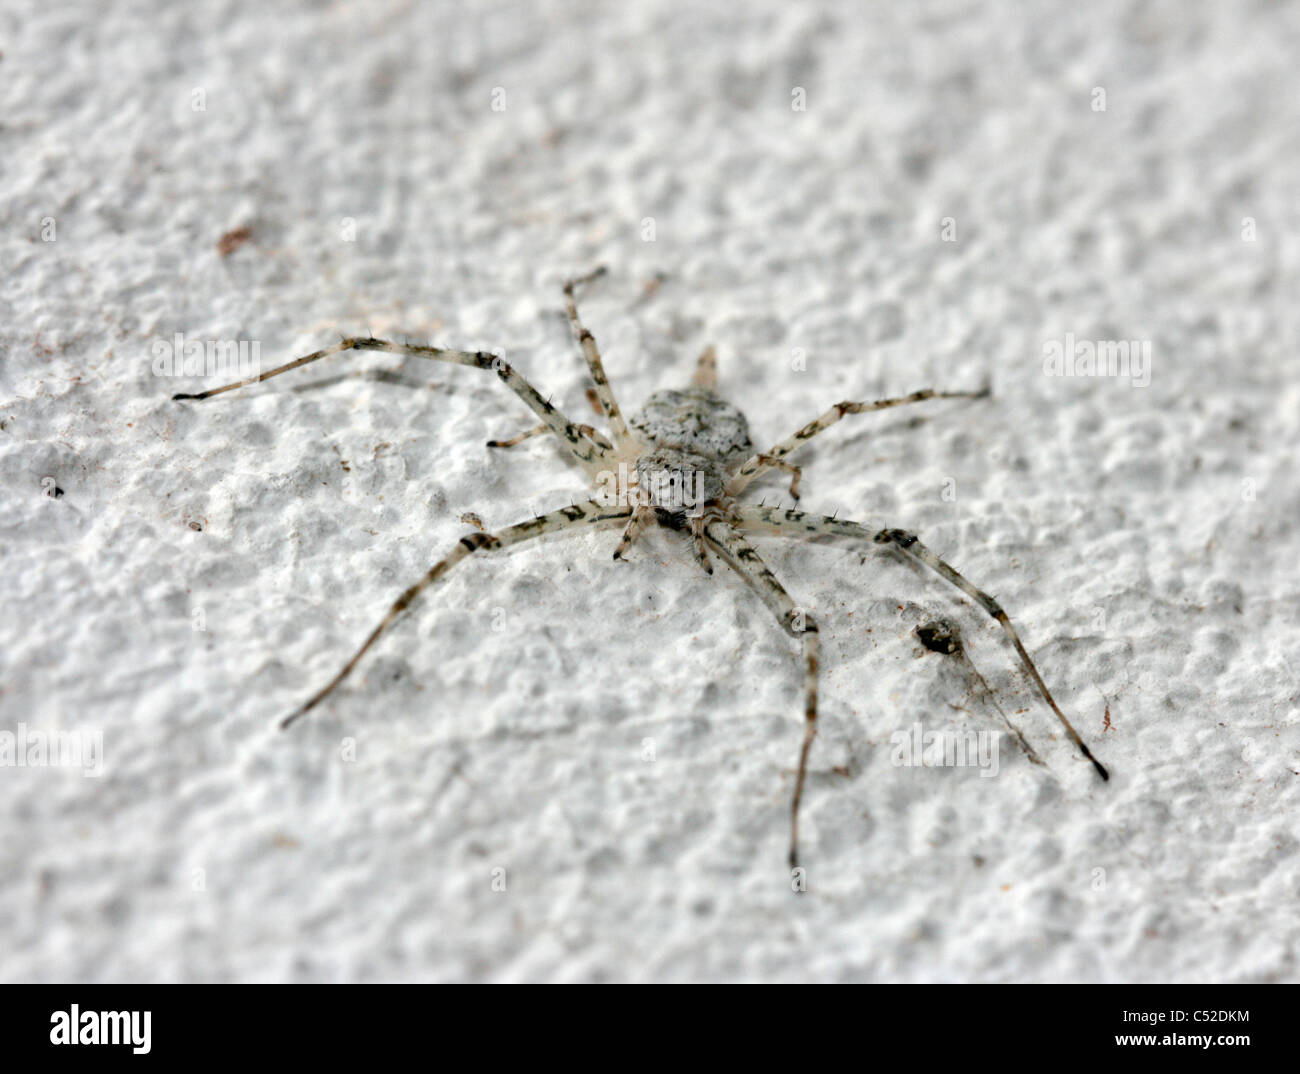 Spider well camouflaged against a wall, Uganda Stock Photo